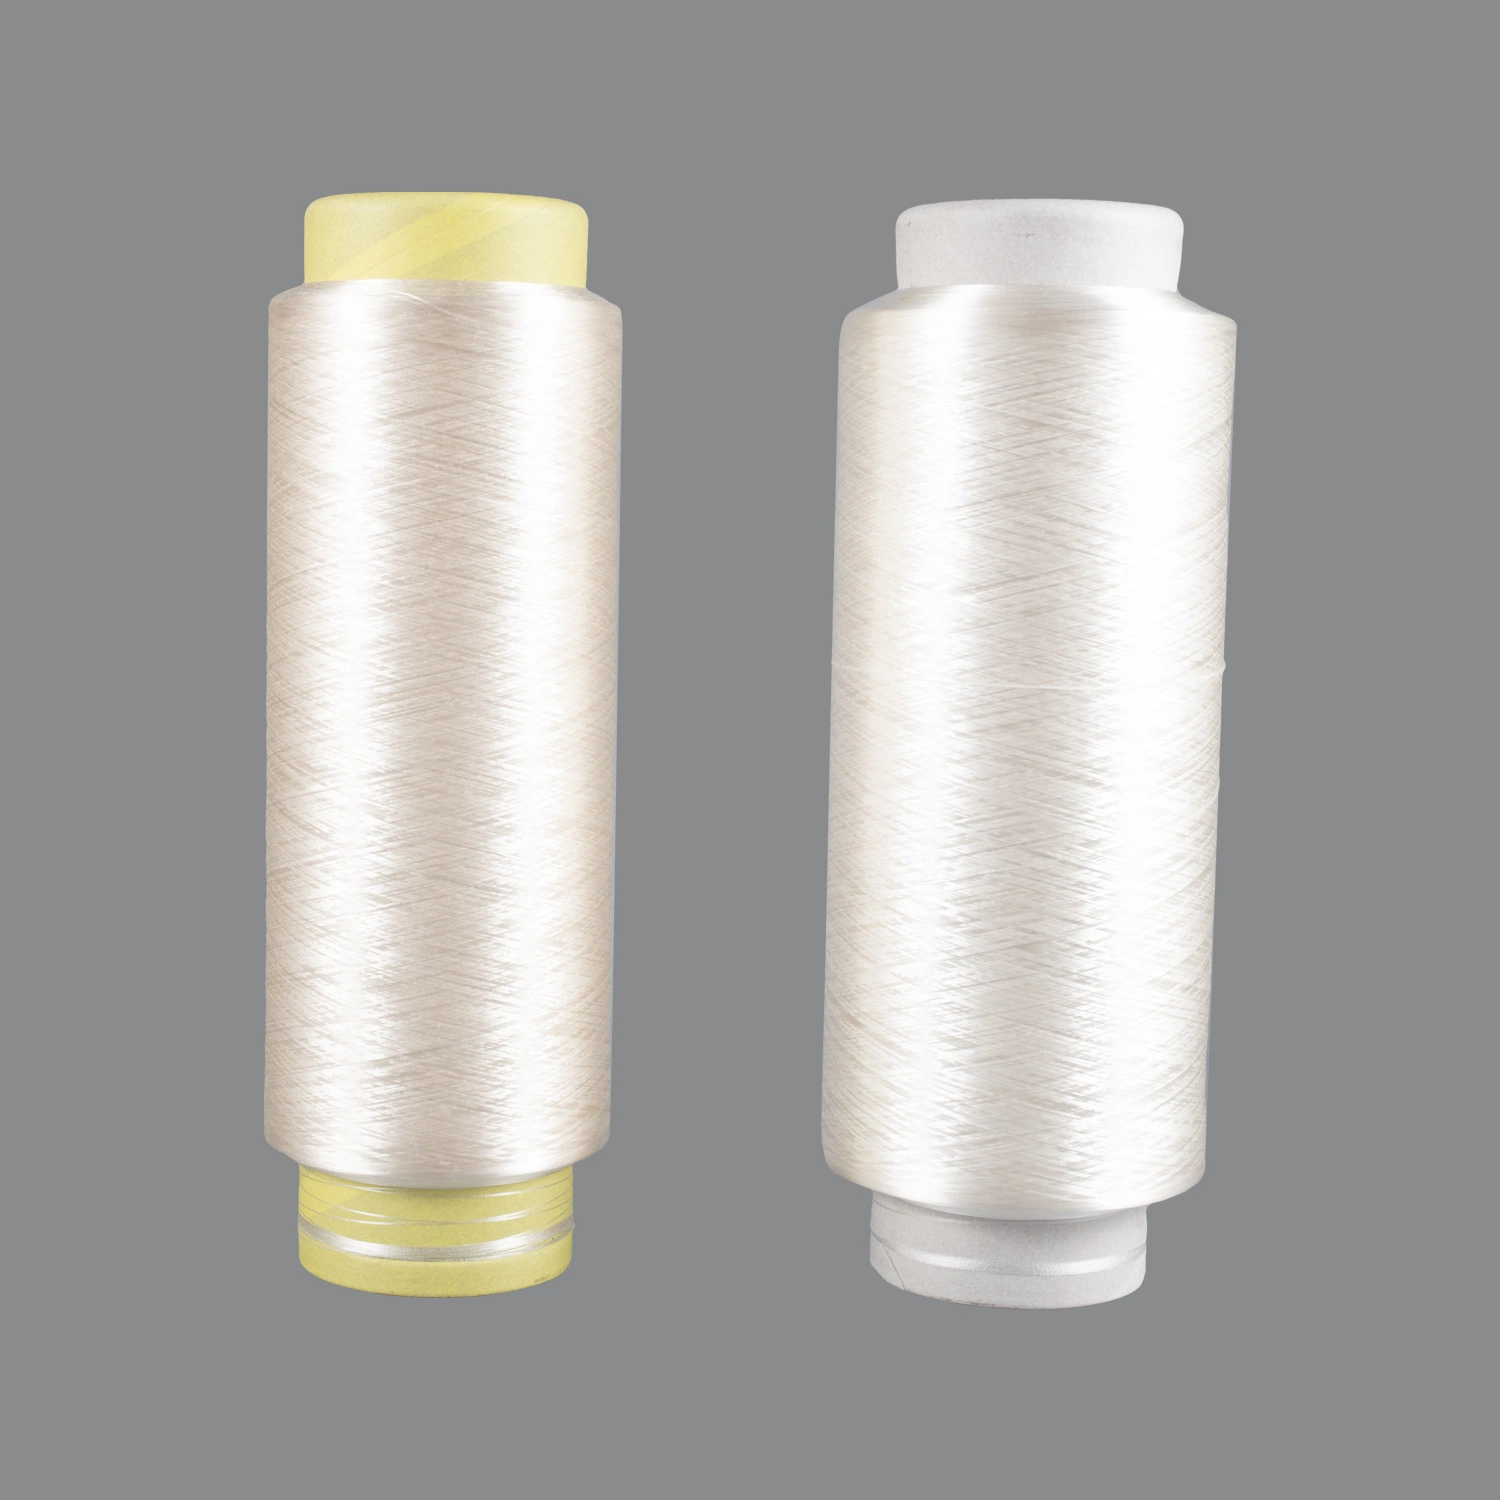 Recycled Grs Polyester Yarn DTY 300d/72f SD Filament Wholesale/Supplier China Manufacturer for Knitting Weaving Warp